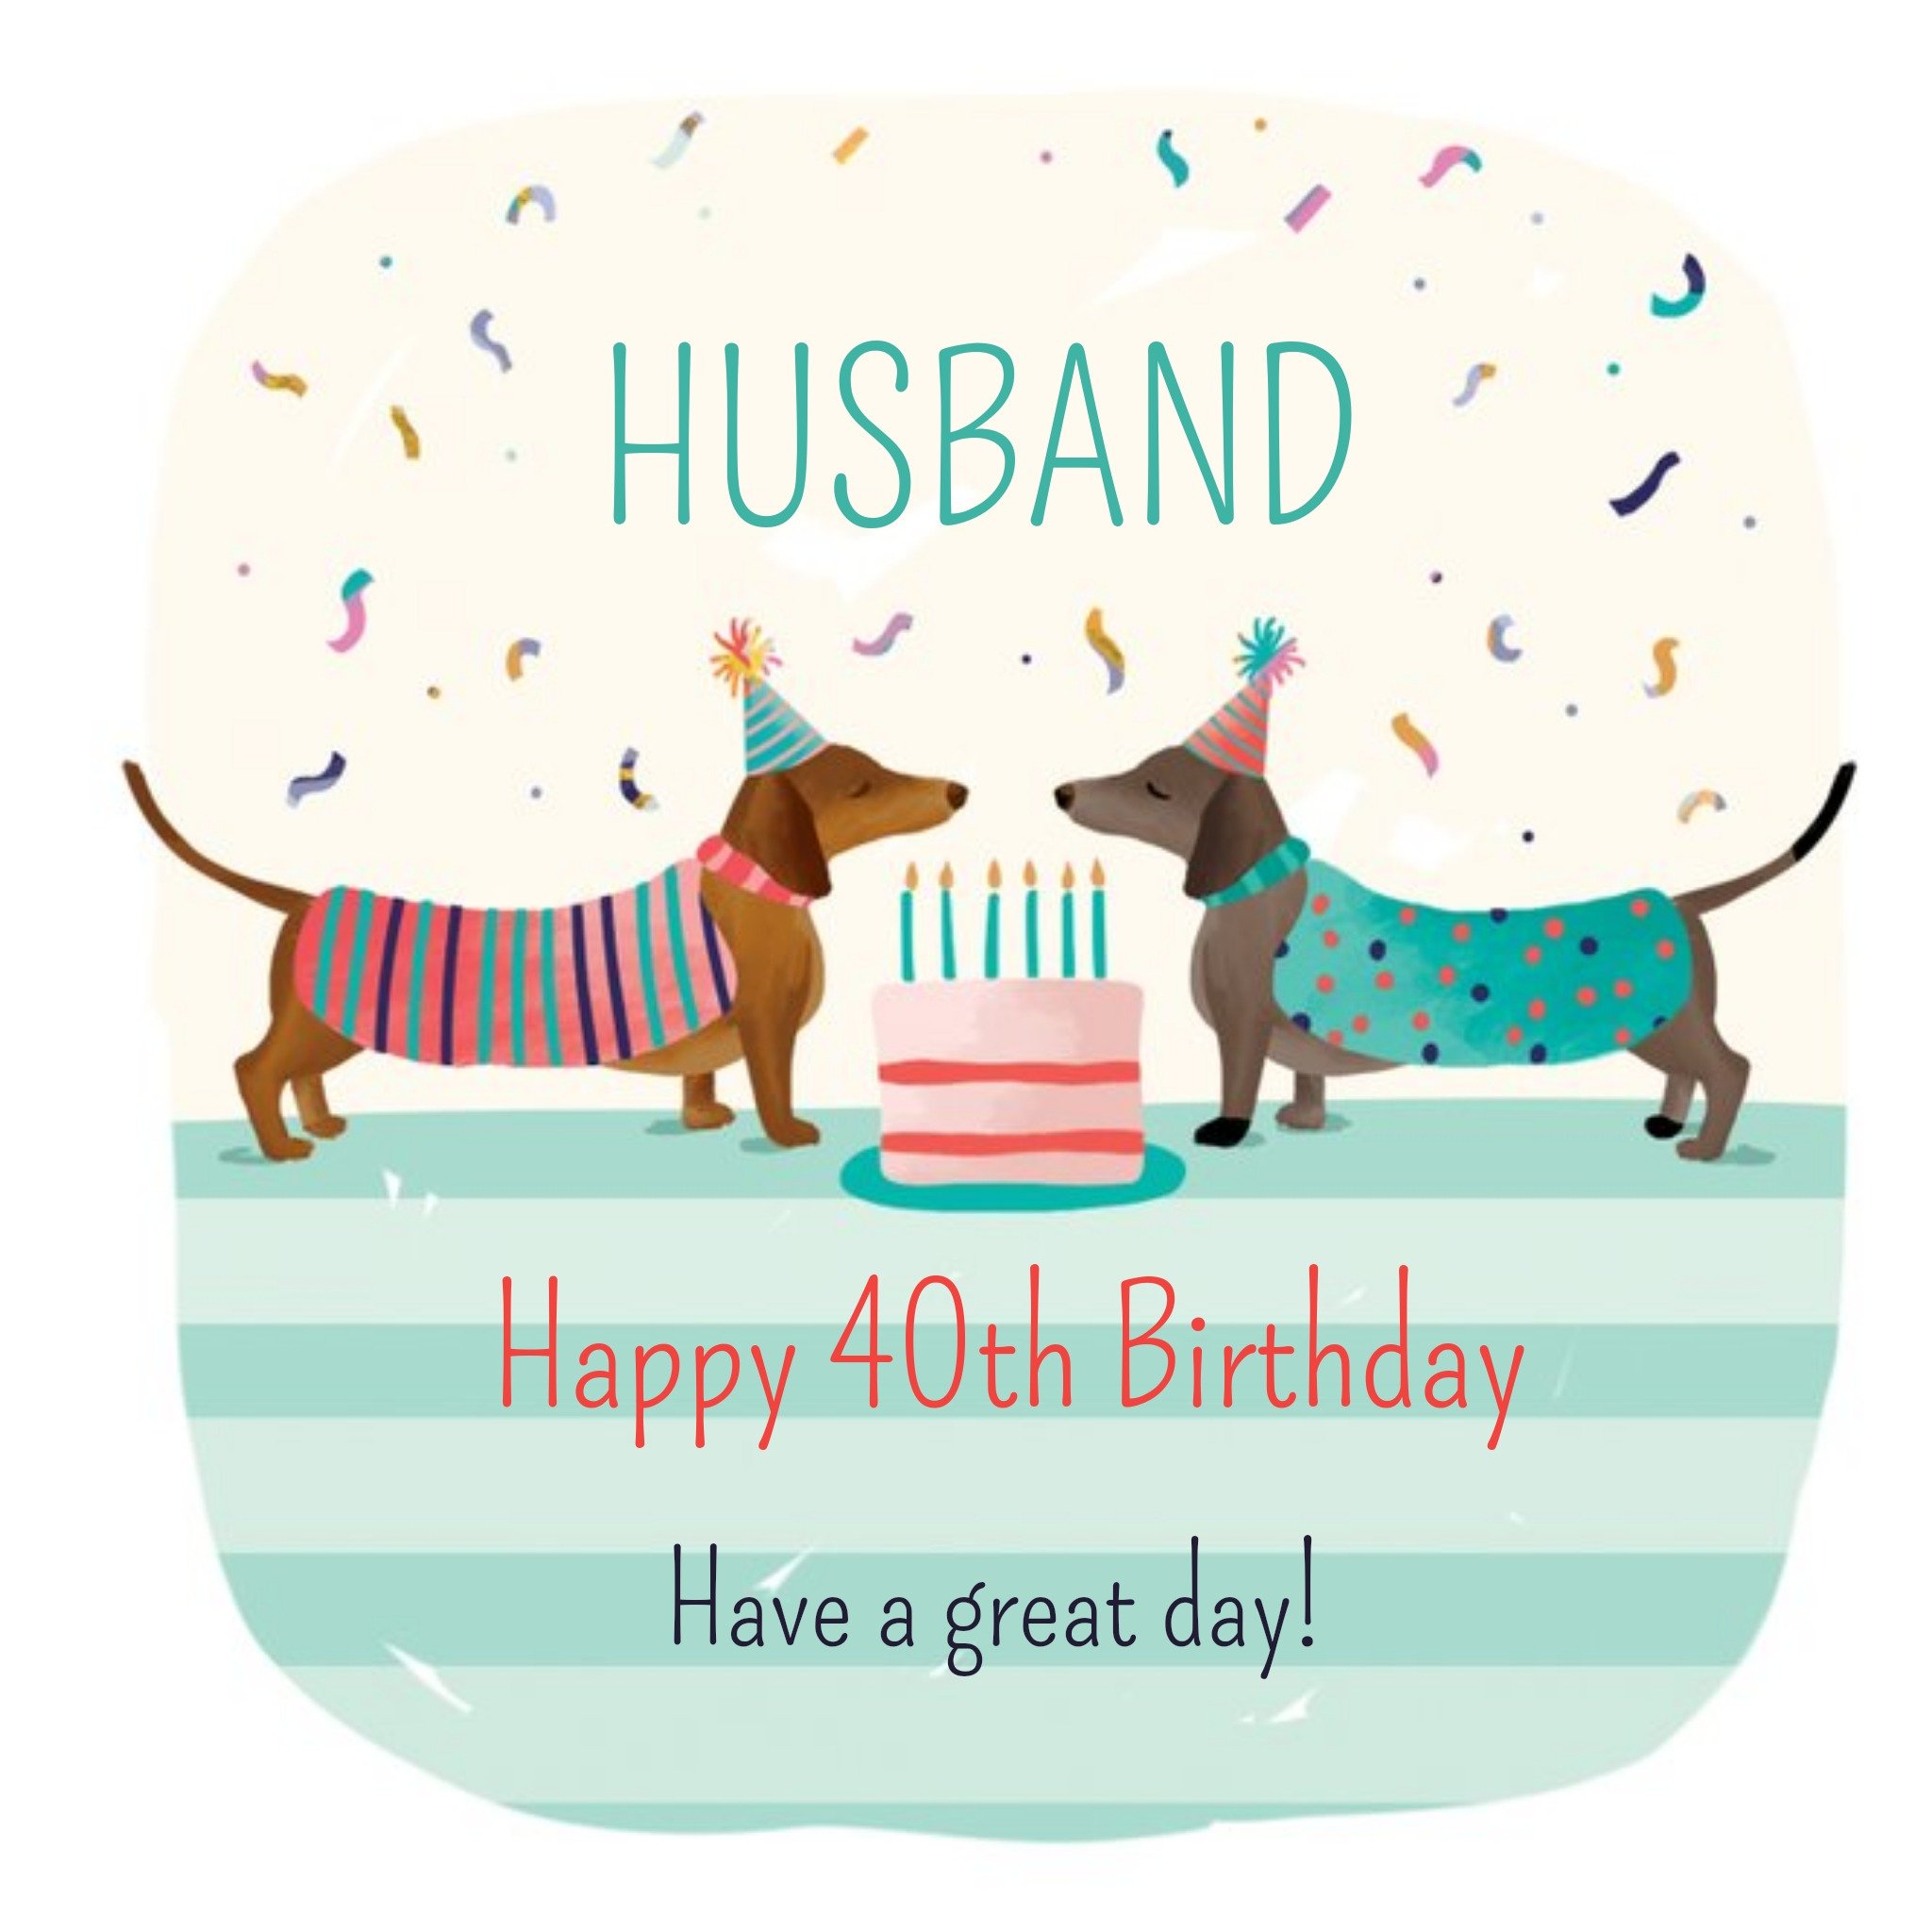 Moonpig Illustration Of A Pair Of Sausage Dogs With A Birthday Cake Husband's Fortieth Birthday Card